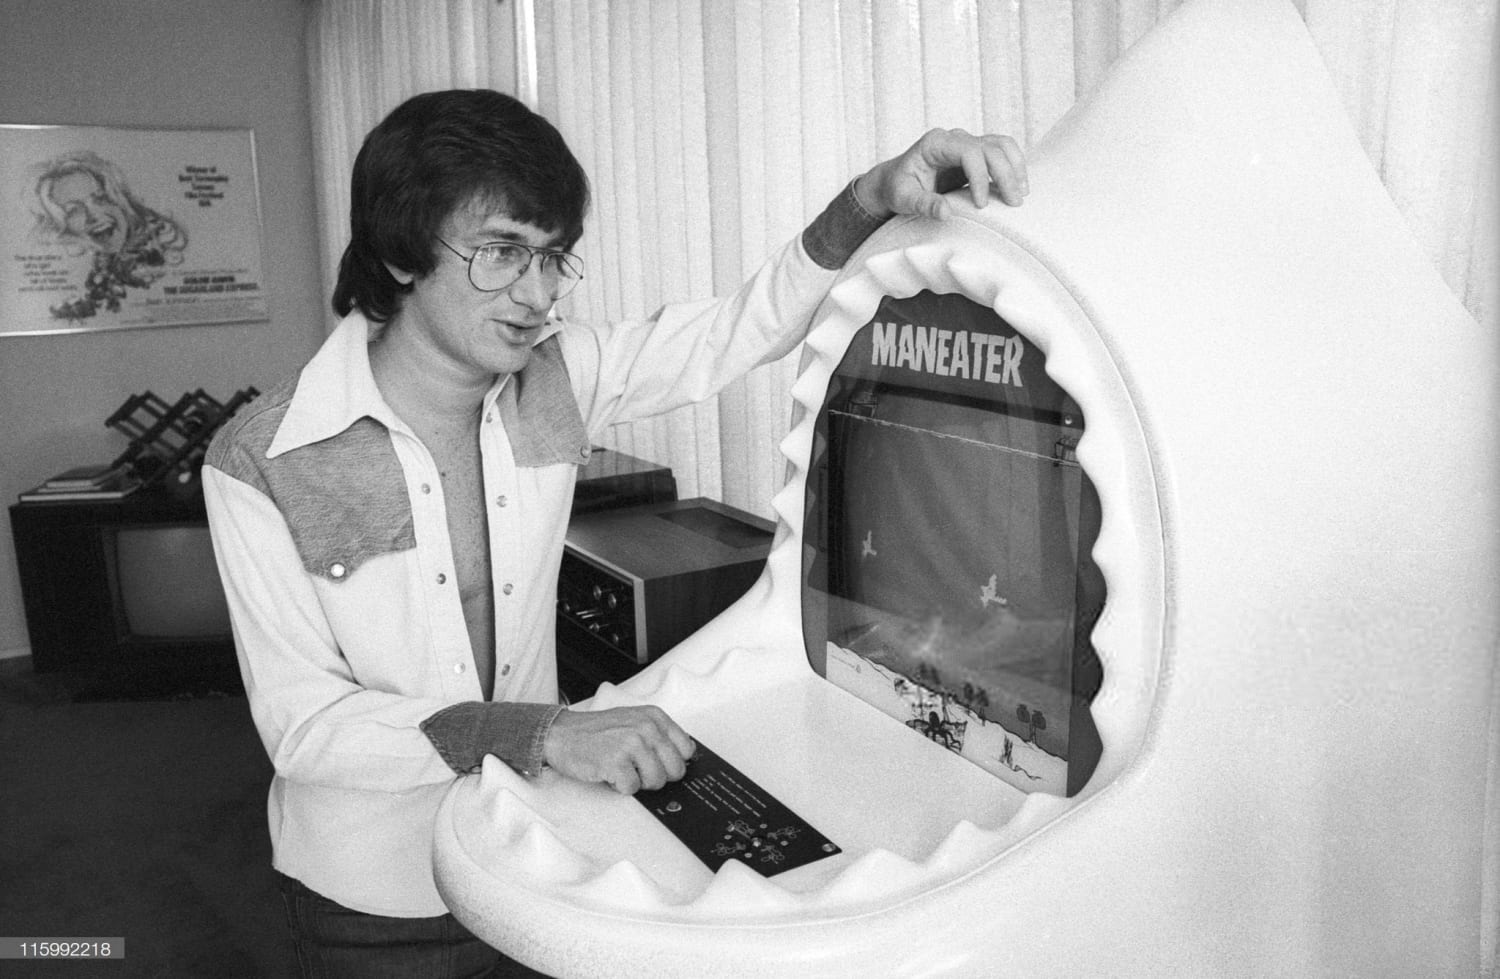 Steven Spielberg with the video game Maneater, 1975